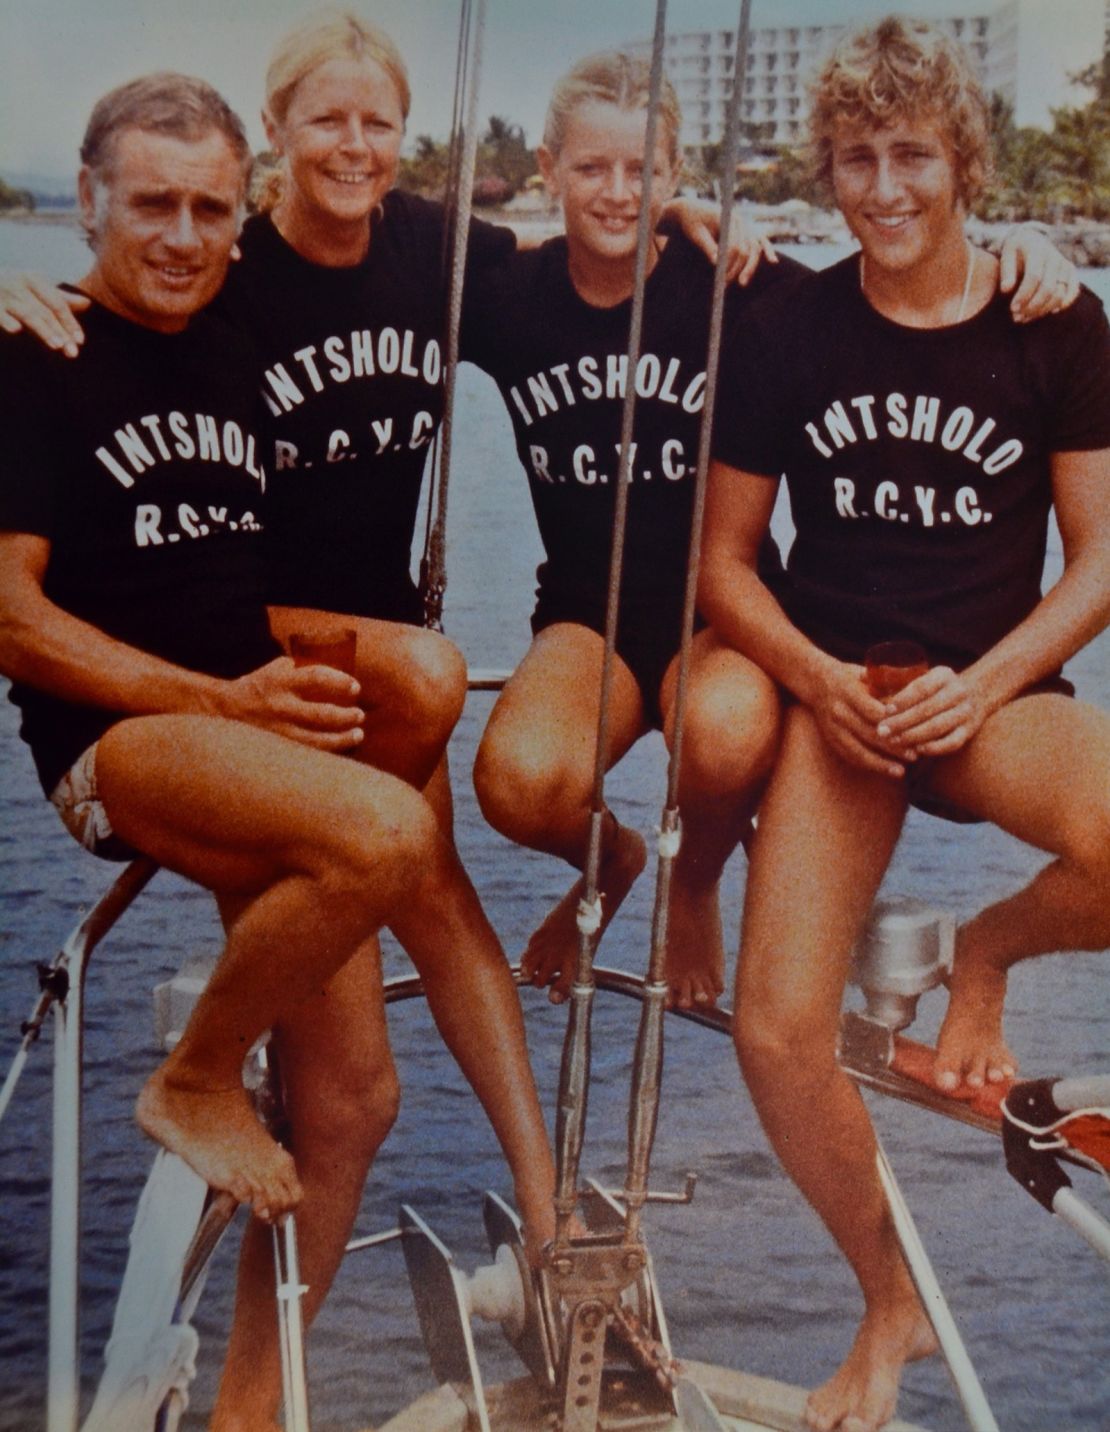 Lorna MacDonald, second from right, arrived in Florida on a sailboat with her family in 1979.